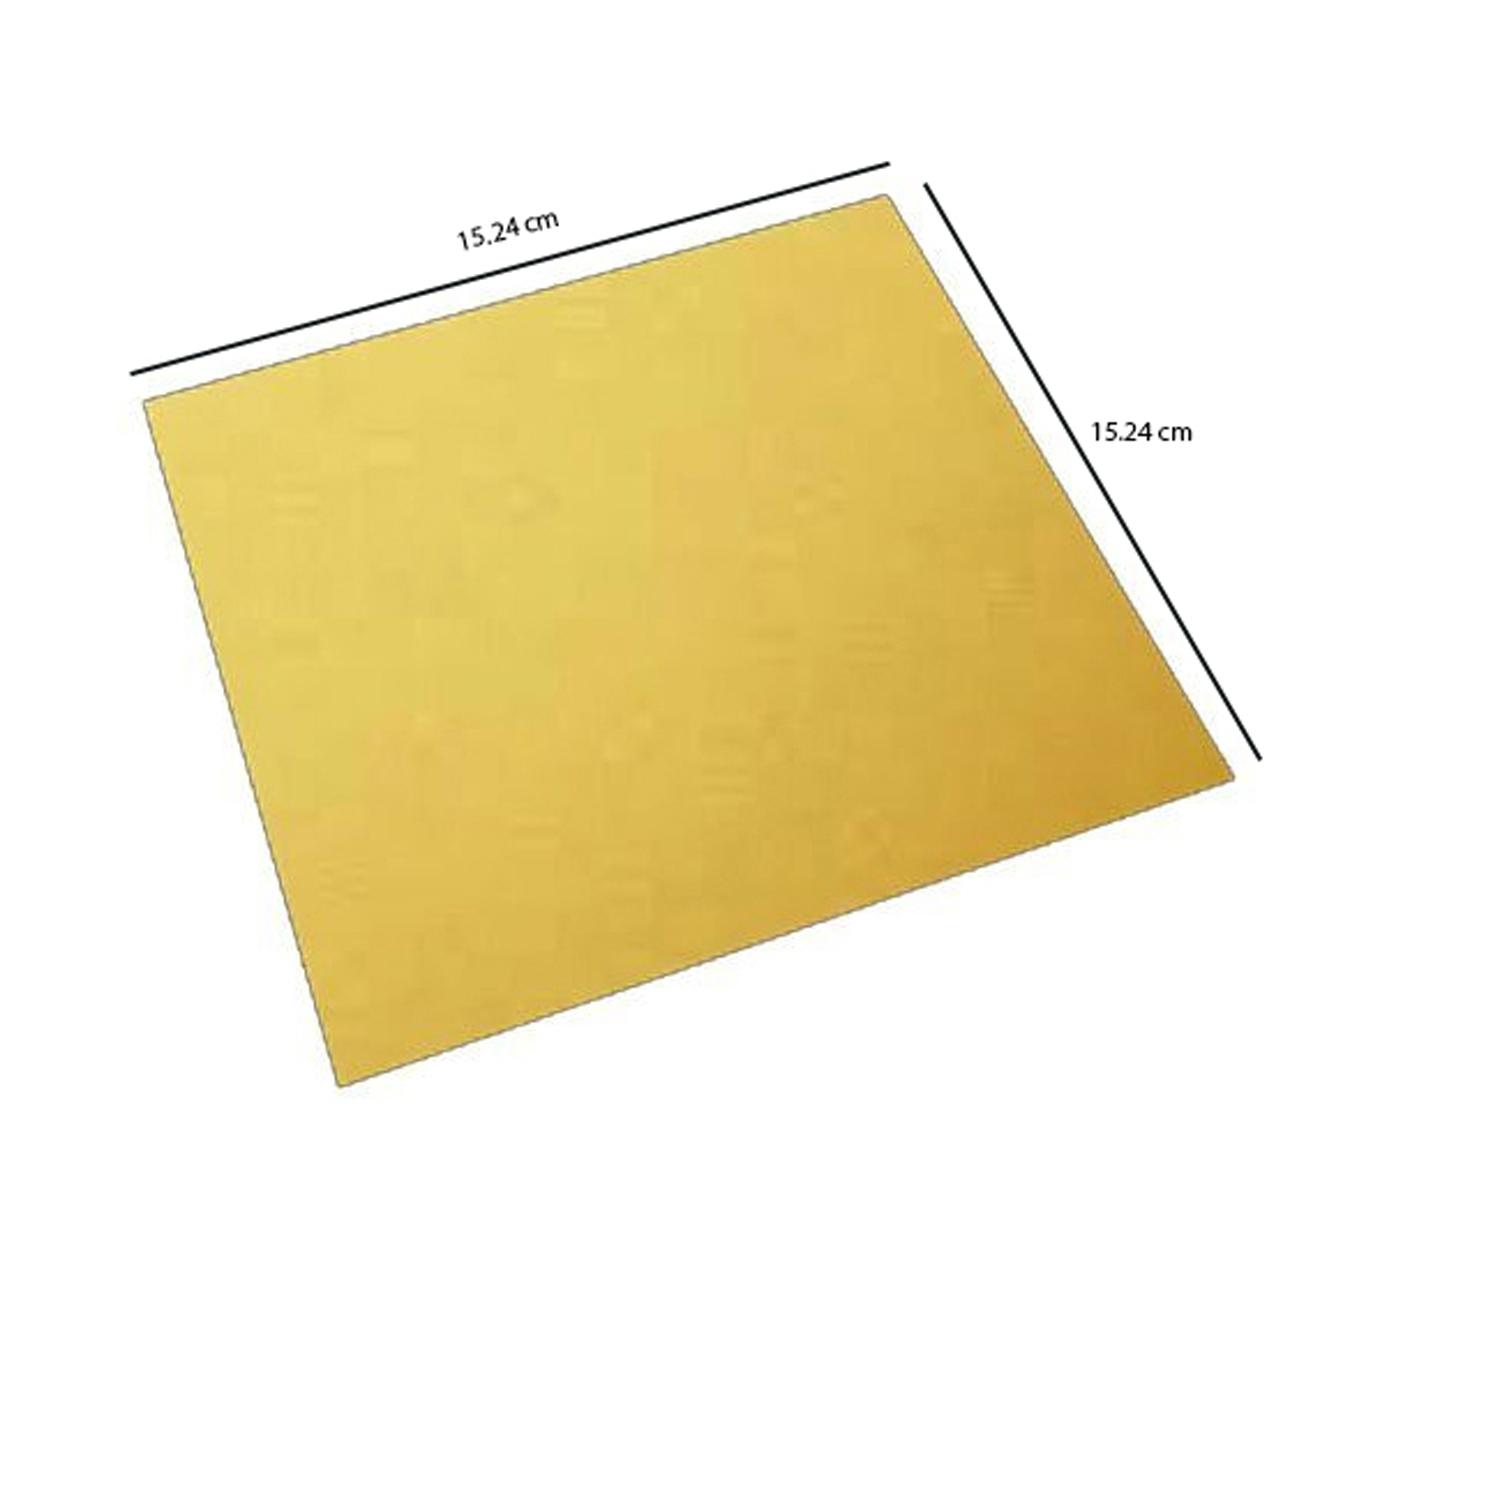 6'' SQUARE SMOOTH GOLD CAKE BOARD